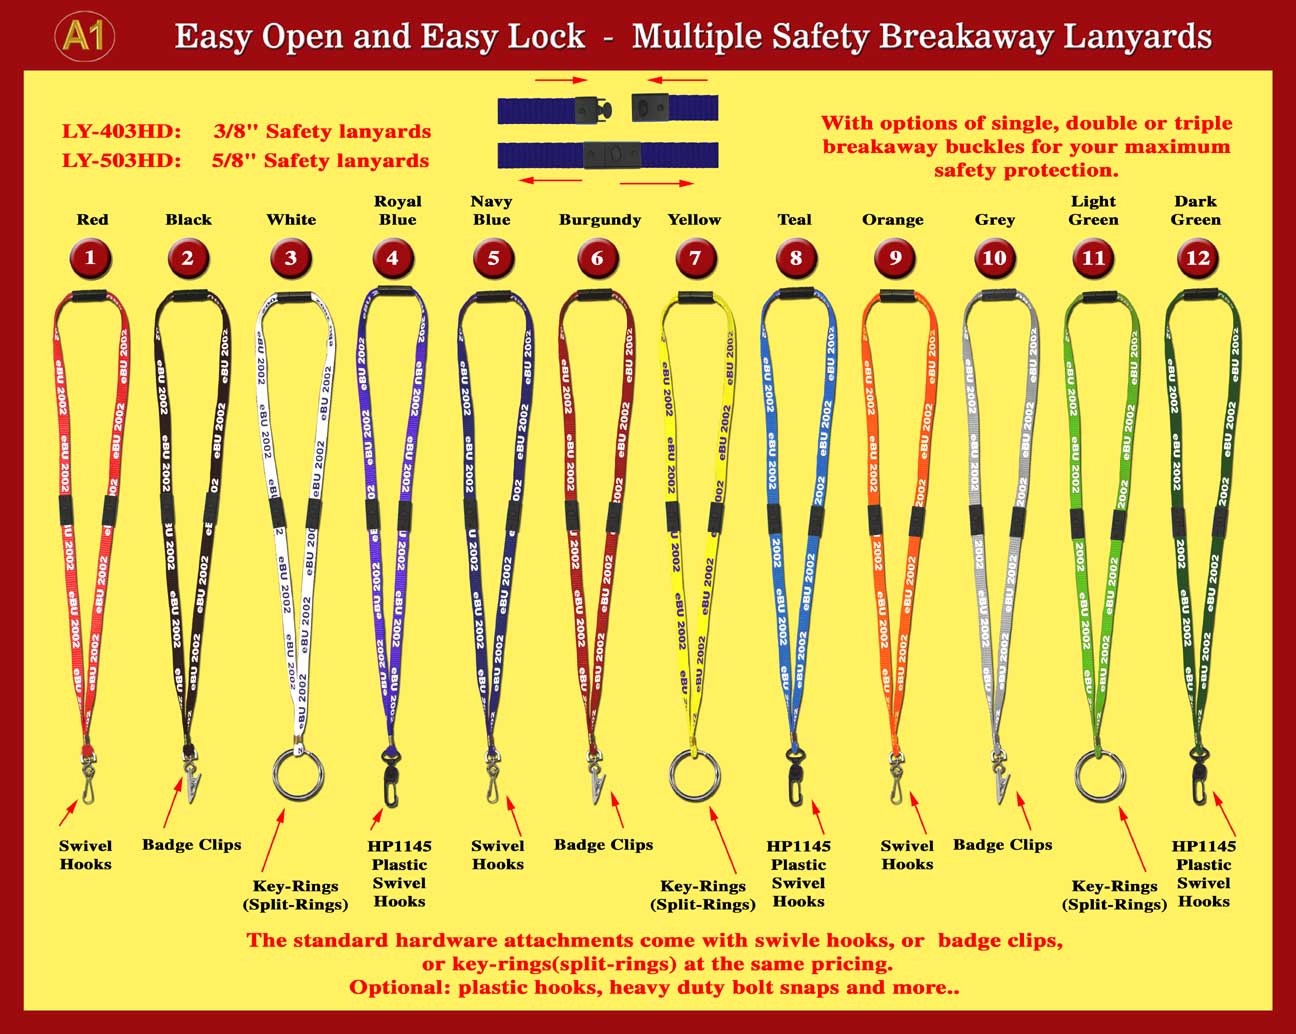 Multiple Safety Breakaway Lanyards For Your Maximum Safety Protection